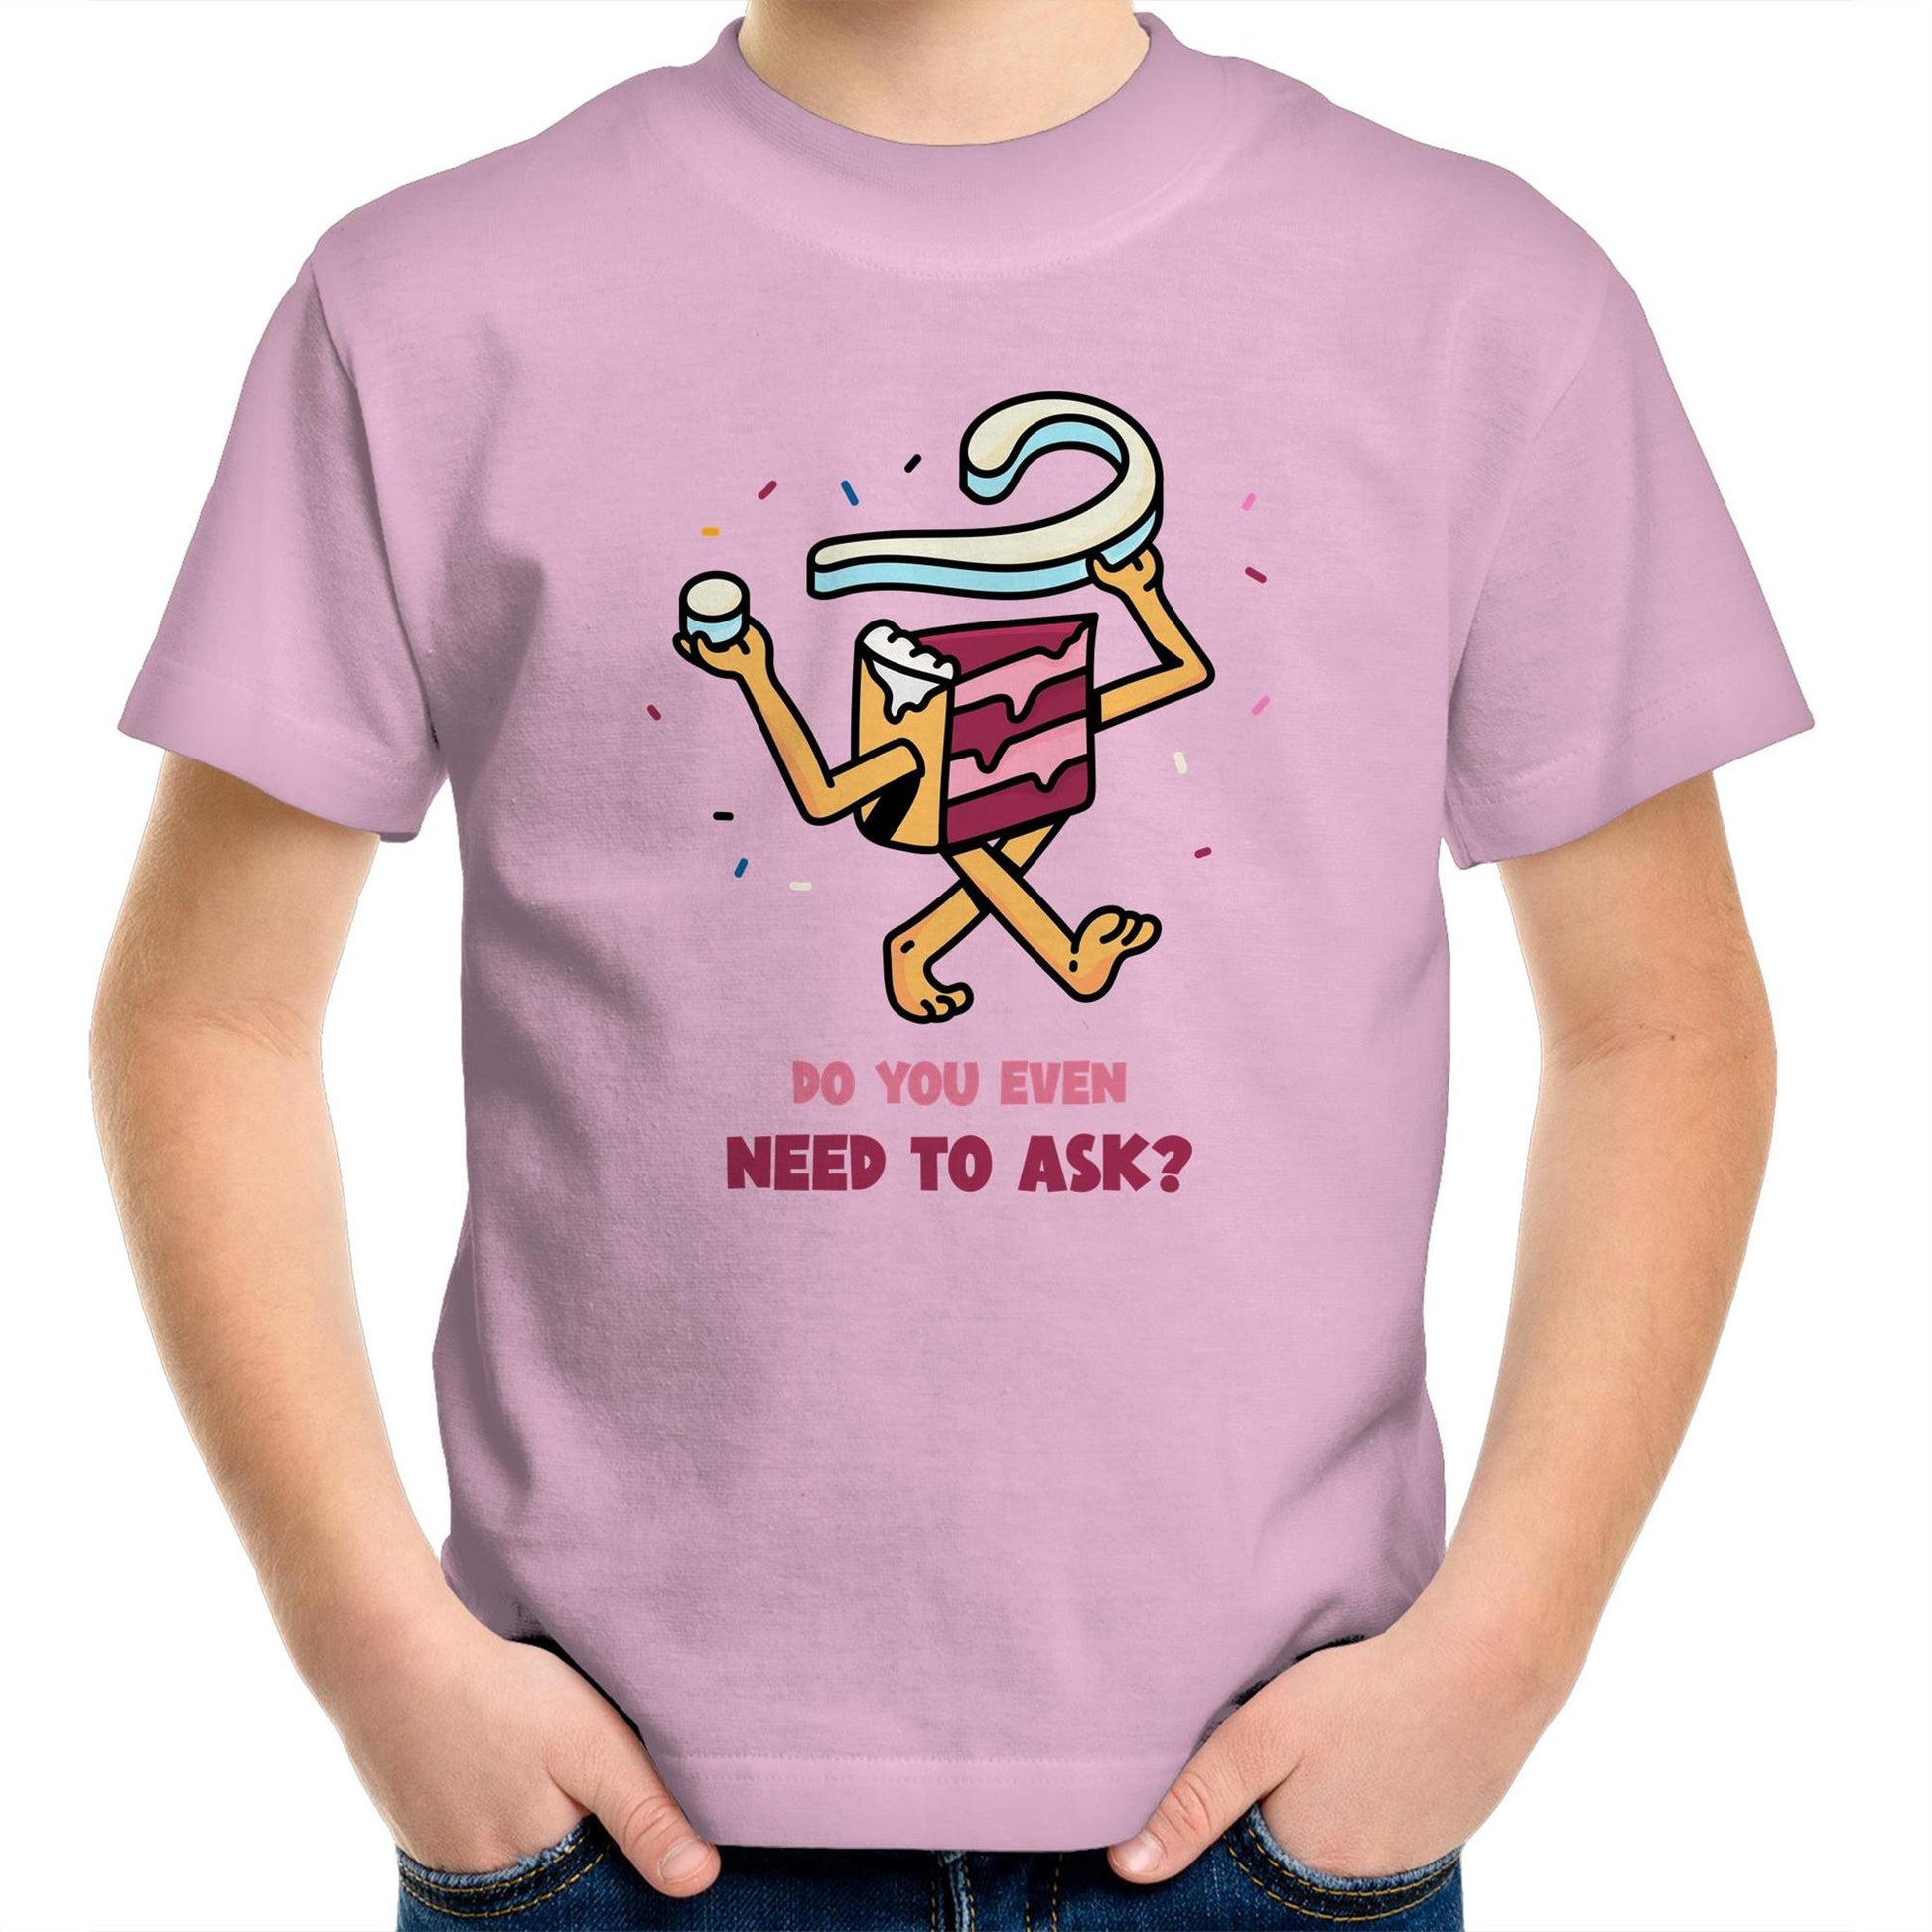 Cake, Do You Even Need To Ask - Kids Youth Crew T-Shirt Pink Kids Youth T-shirt